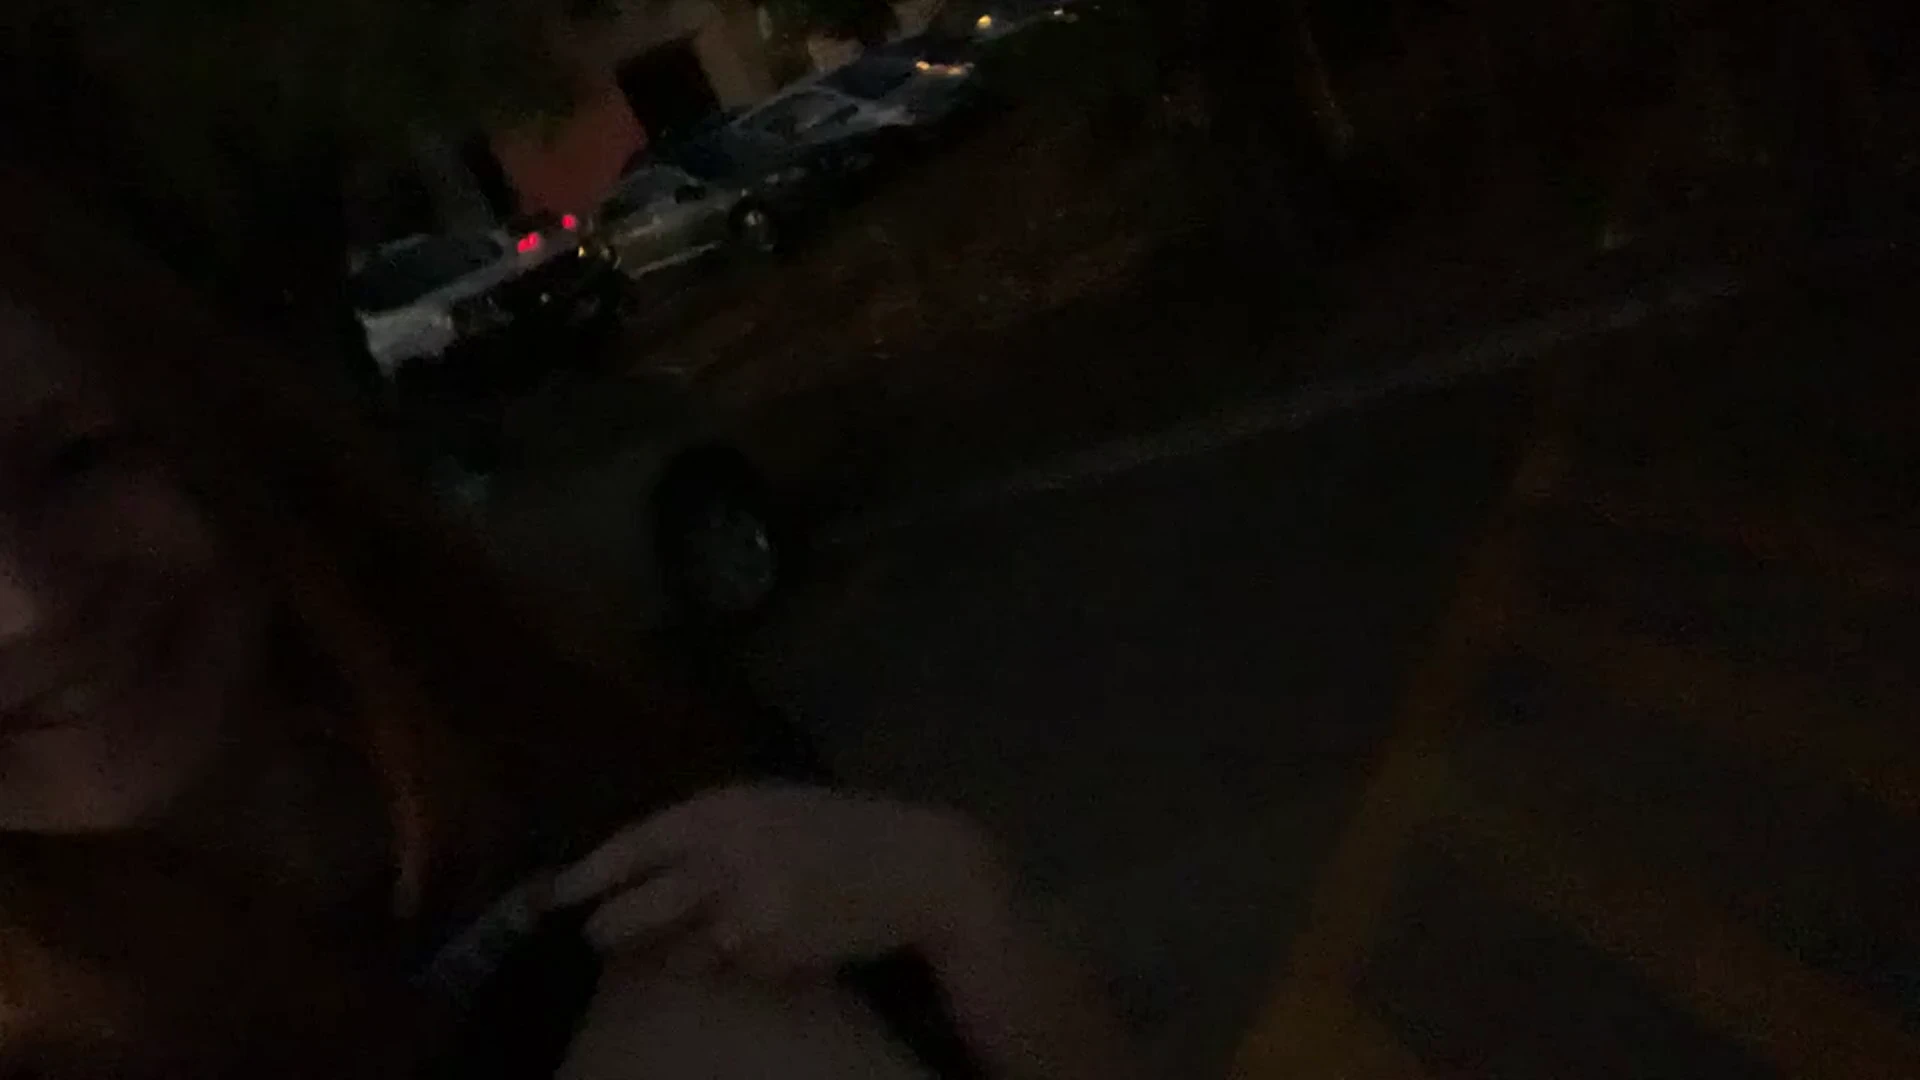 Can’t go out for dinner without a cheeky flash in the parking lot! [gif]